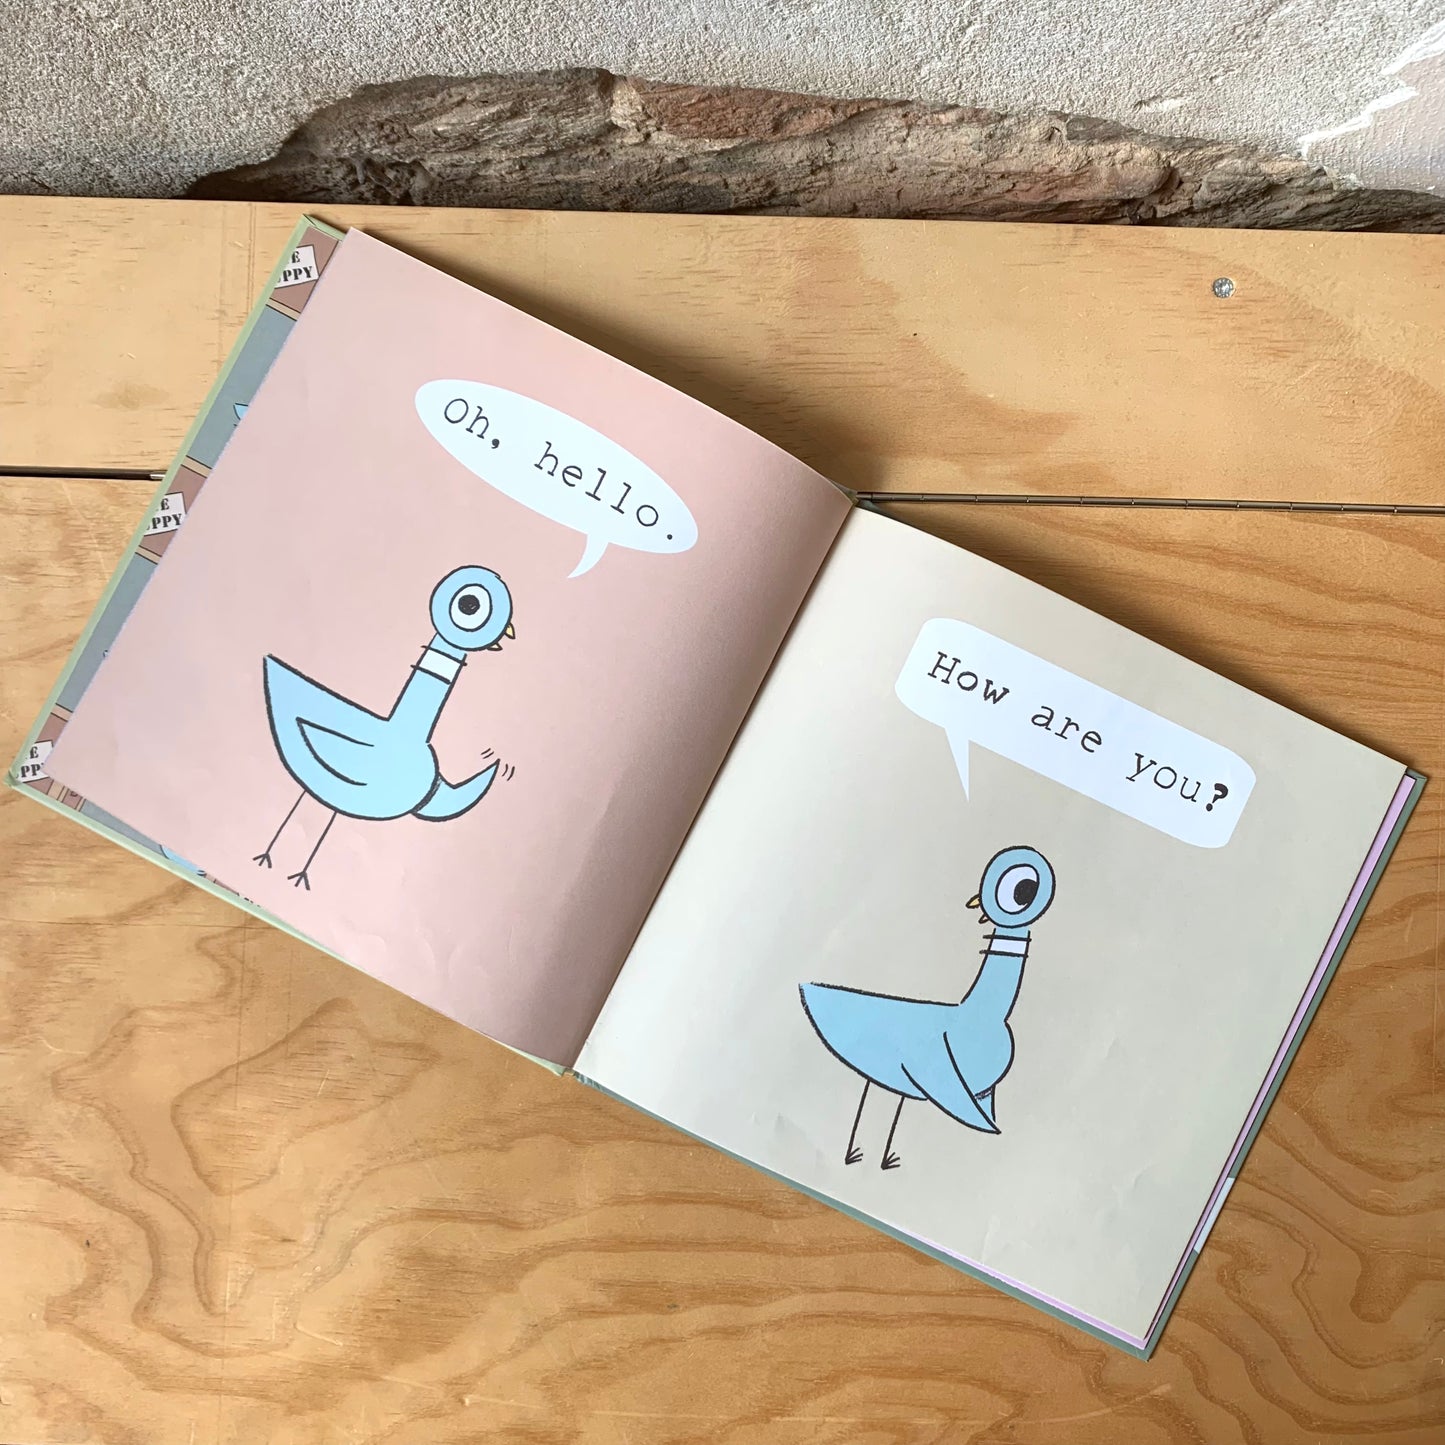 The Pigeon Wants a Puppy! – Mo Willems